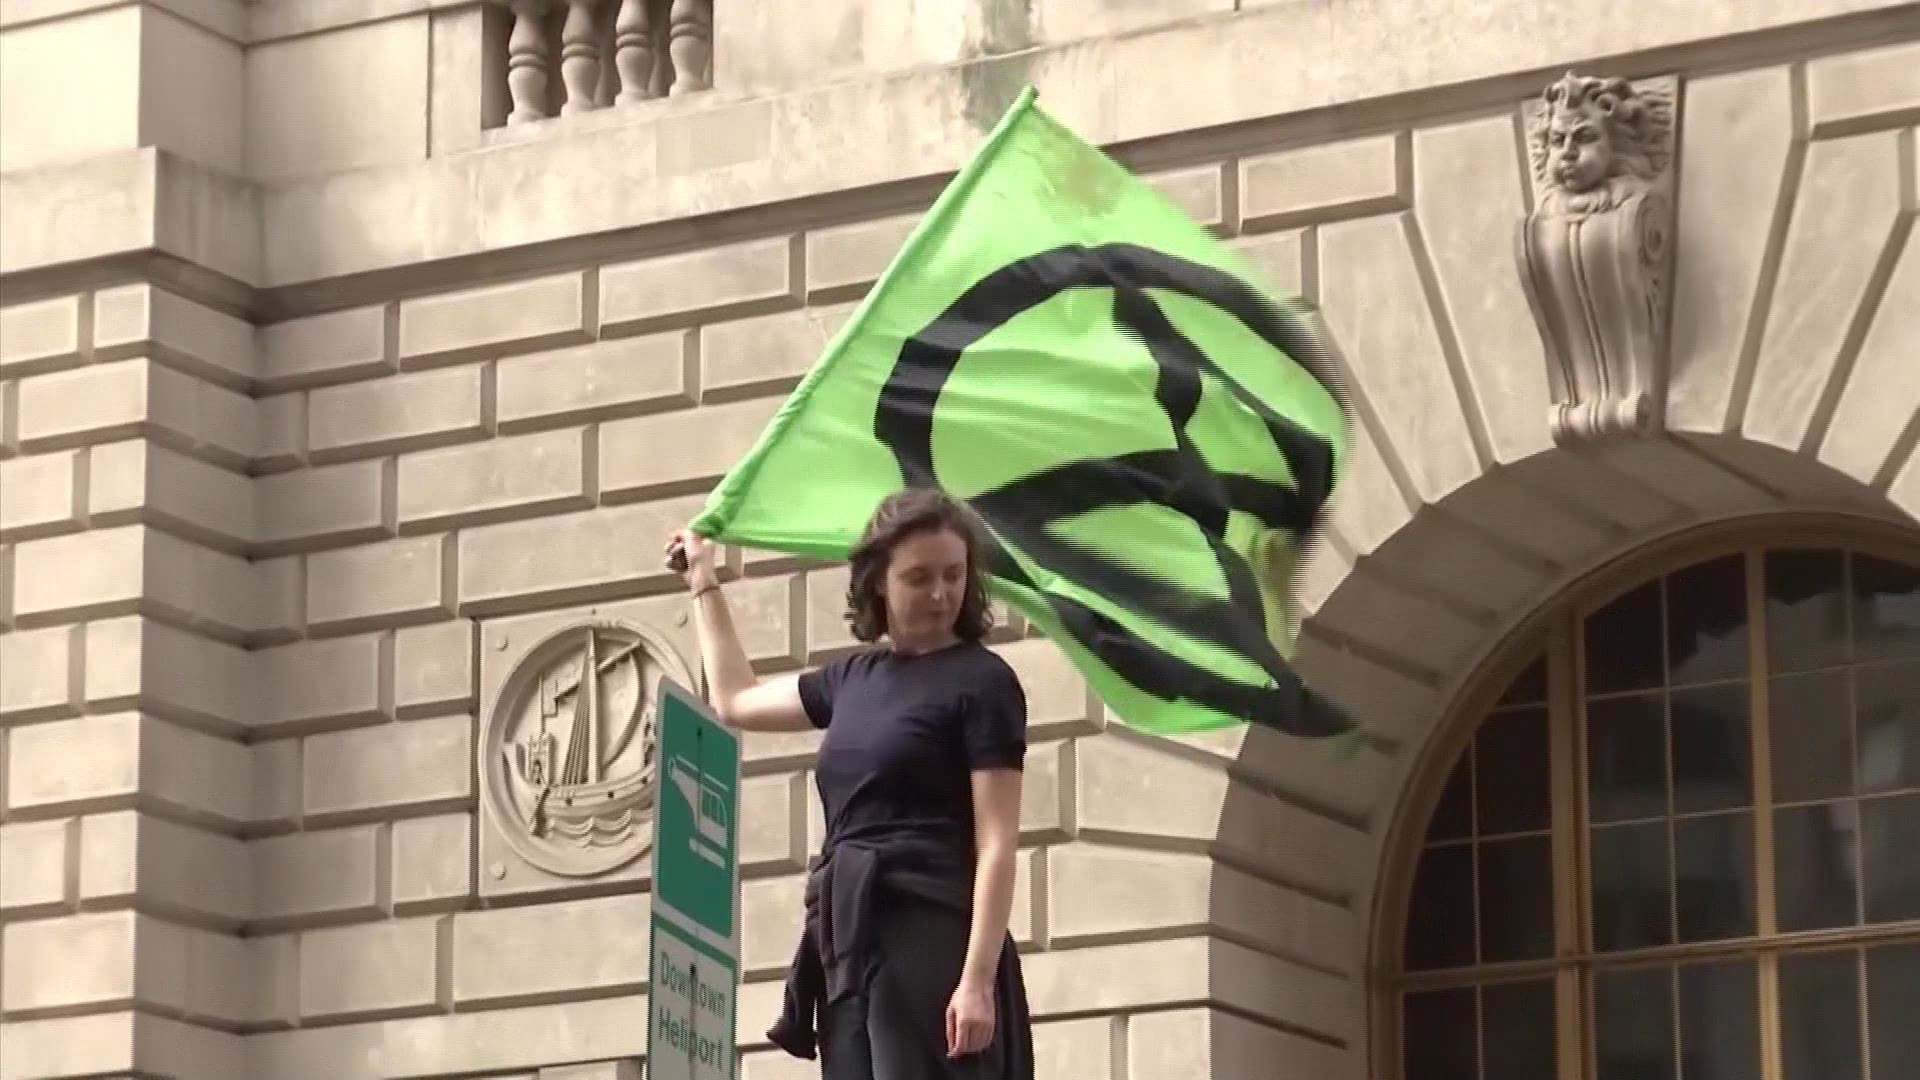 Protesters with Extinction Rebellion have doused the famous charging bull statue in NYC with fake blood as part of a protest against climate change.